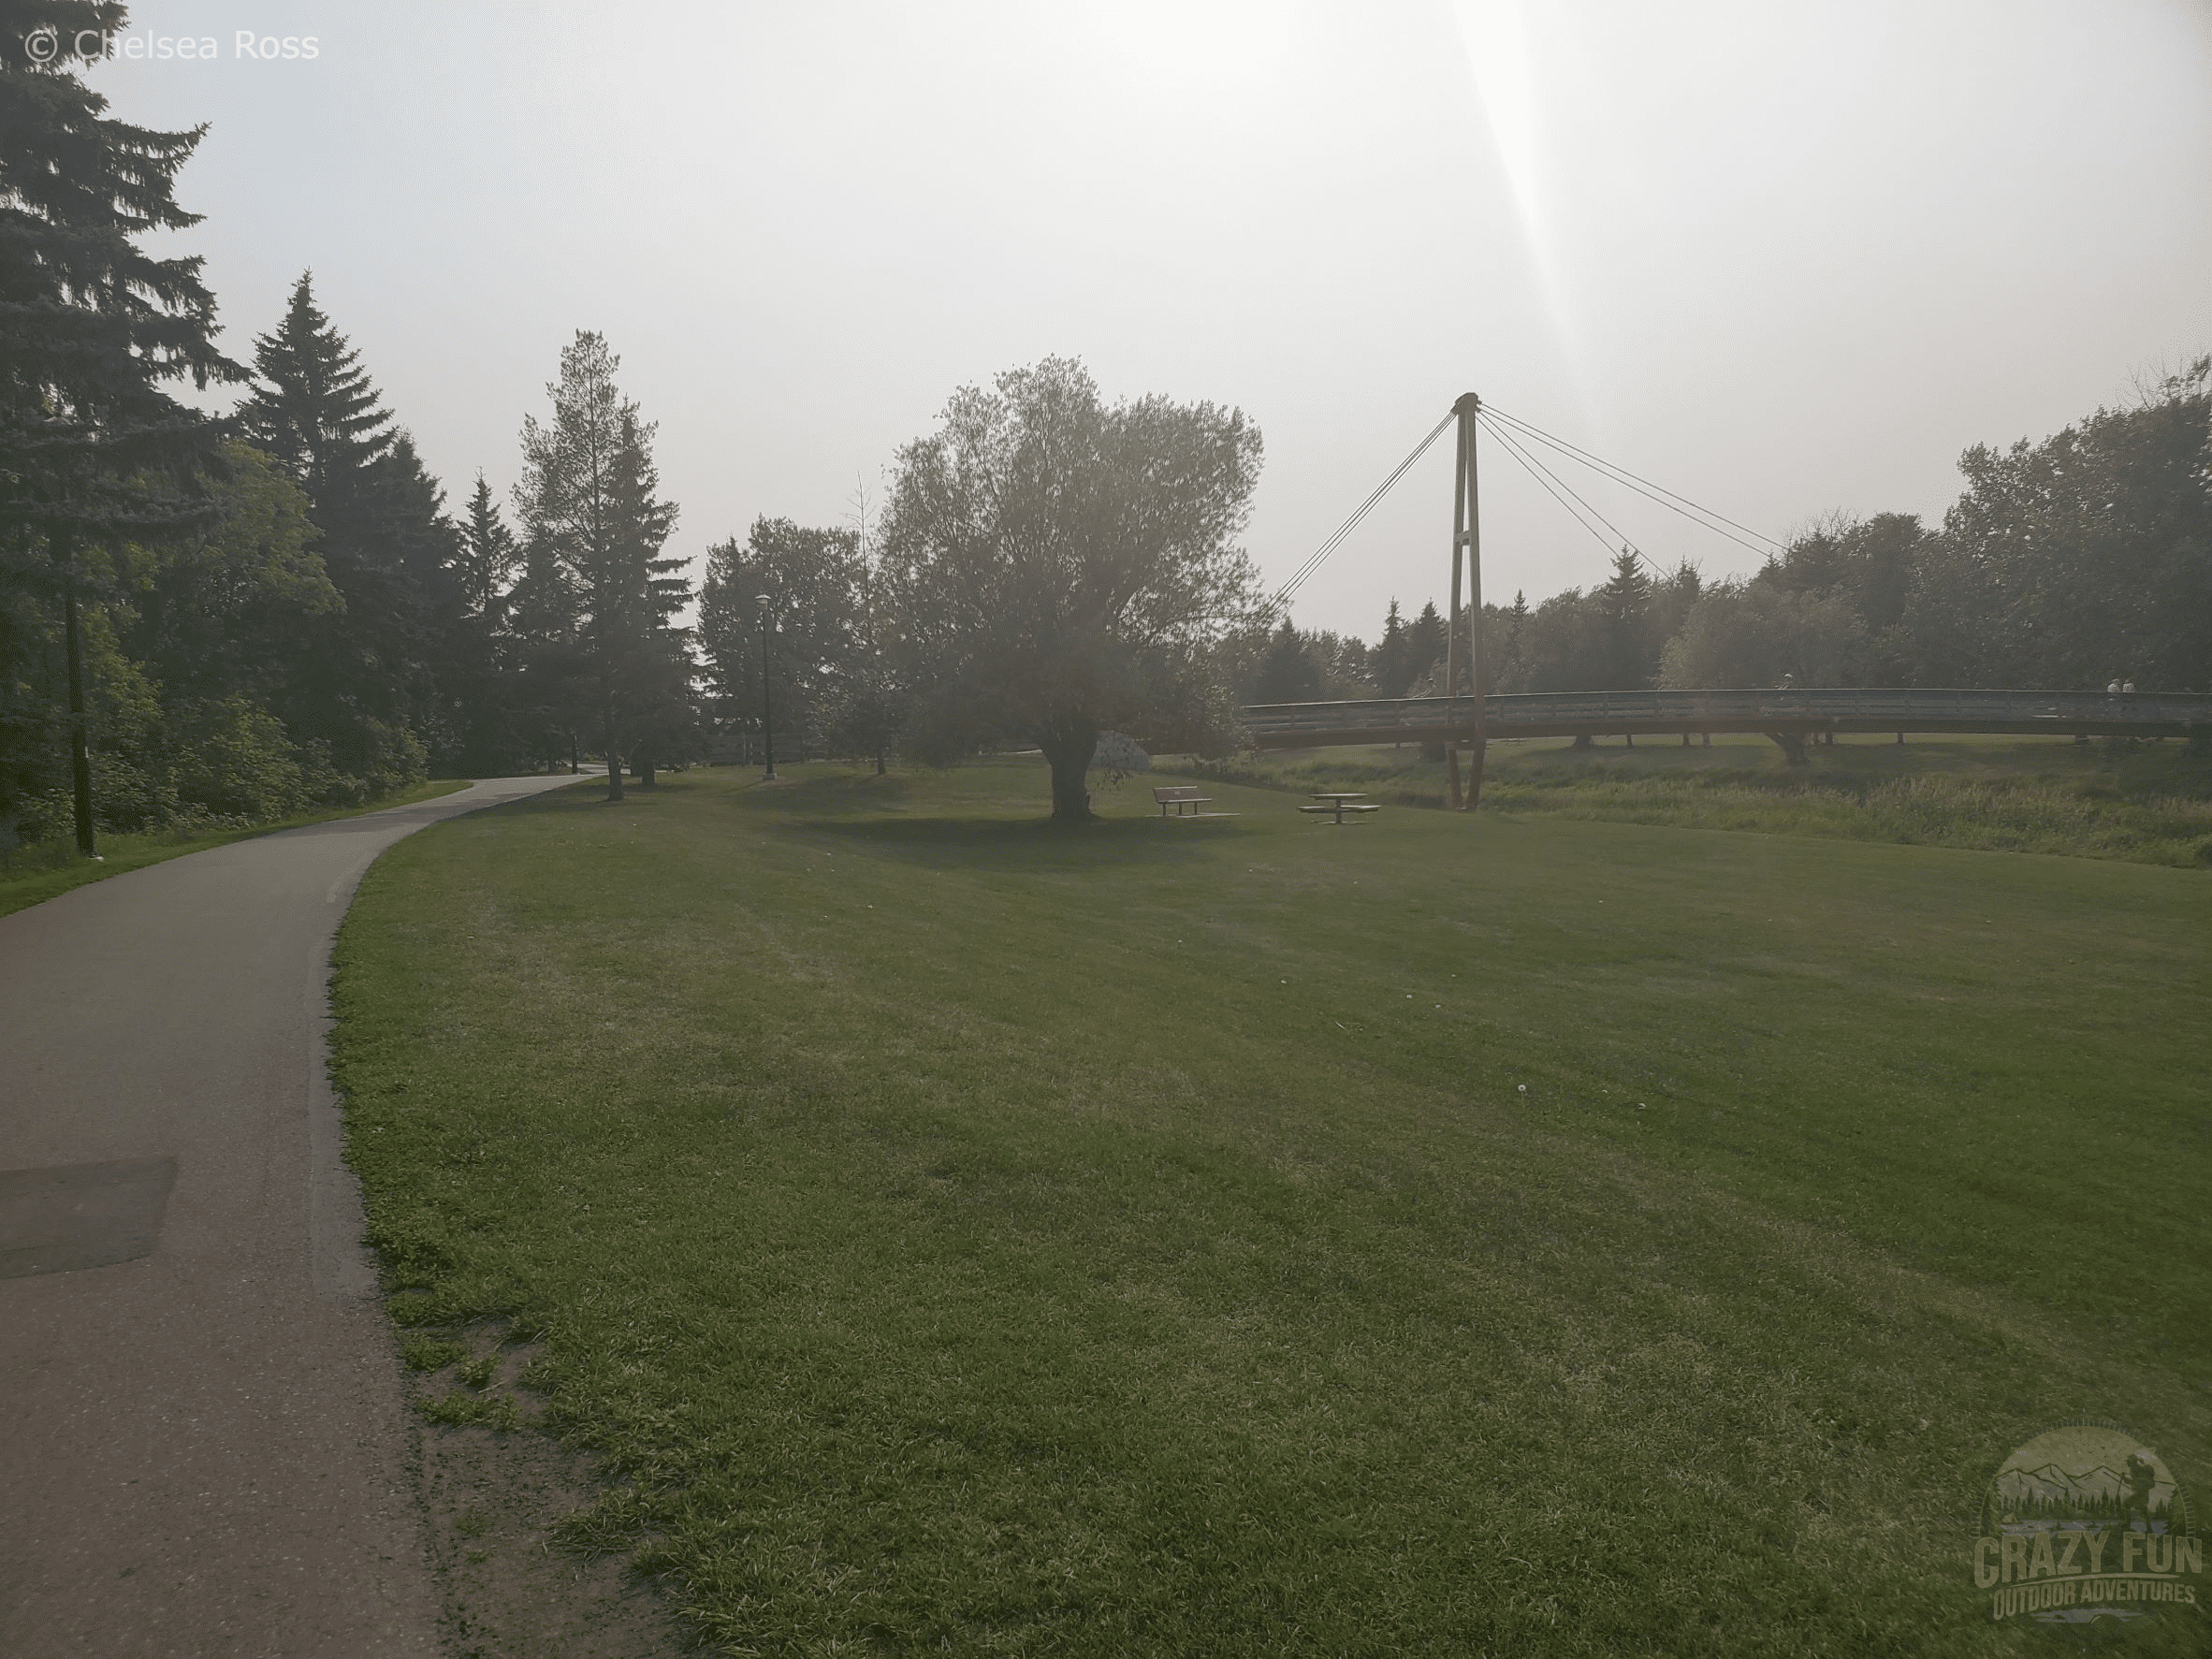 A bridge joining the north and south pathways. A green grassy field is to the right with the path to the left.